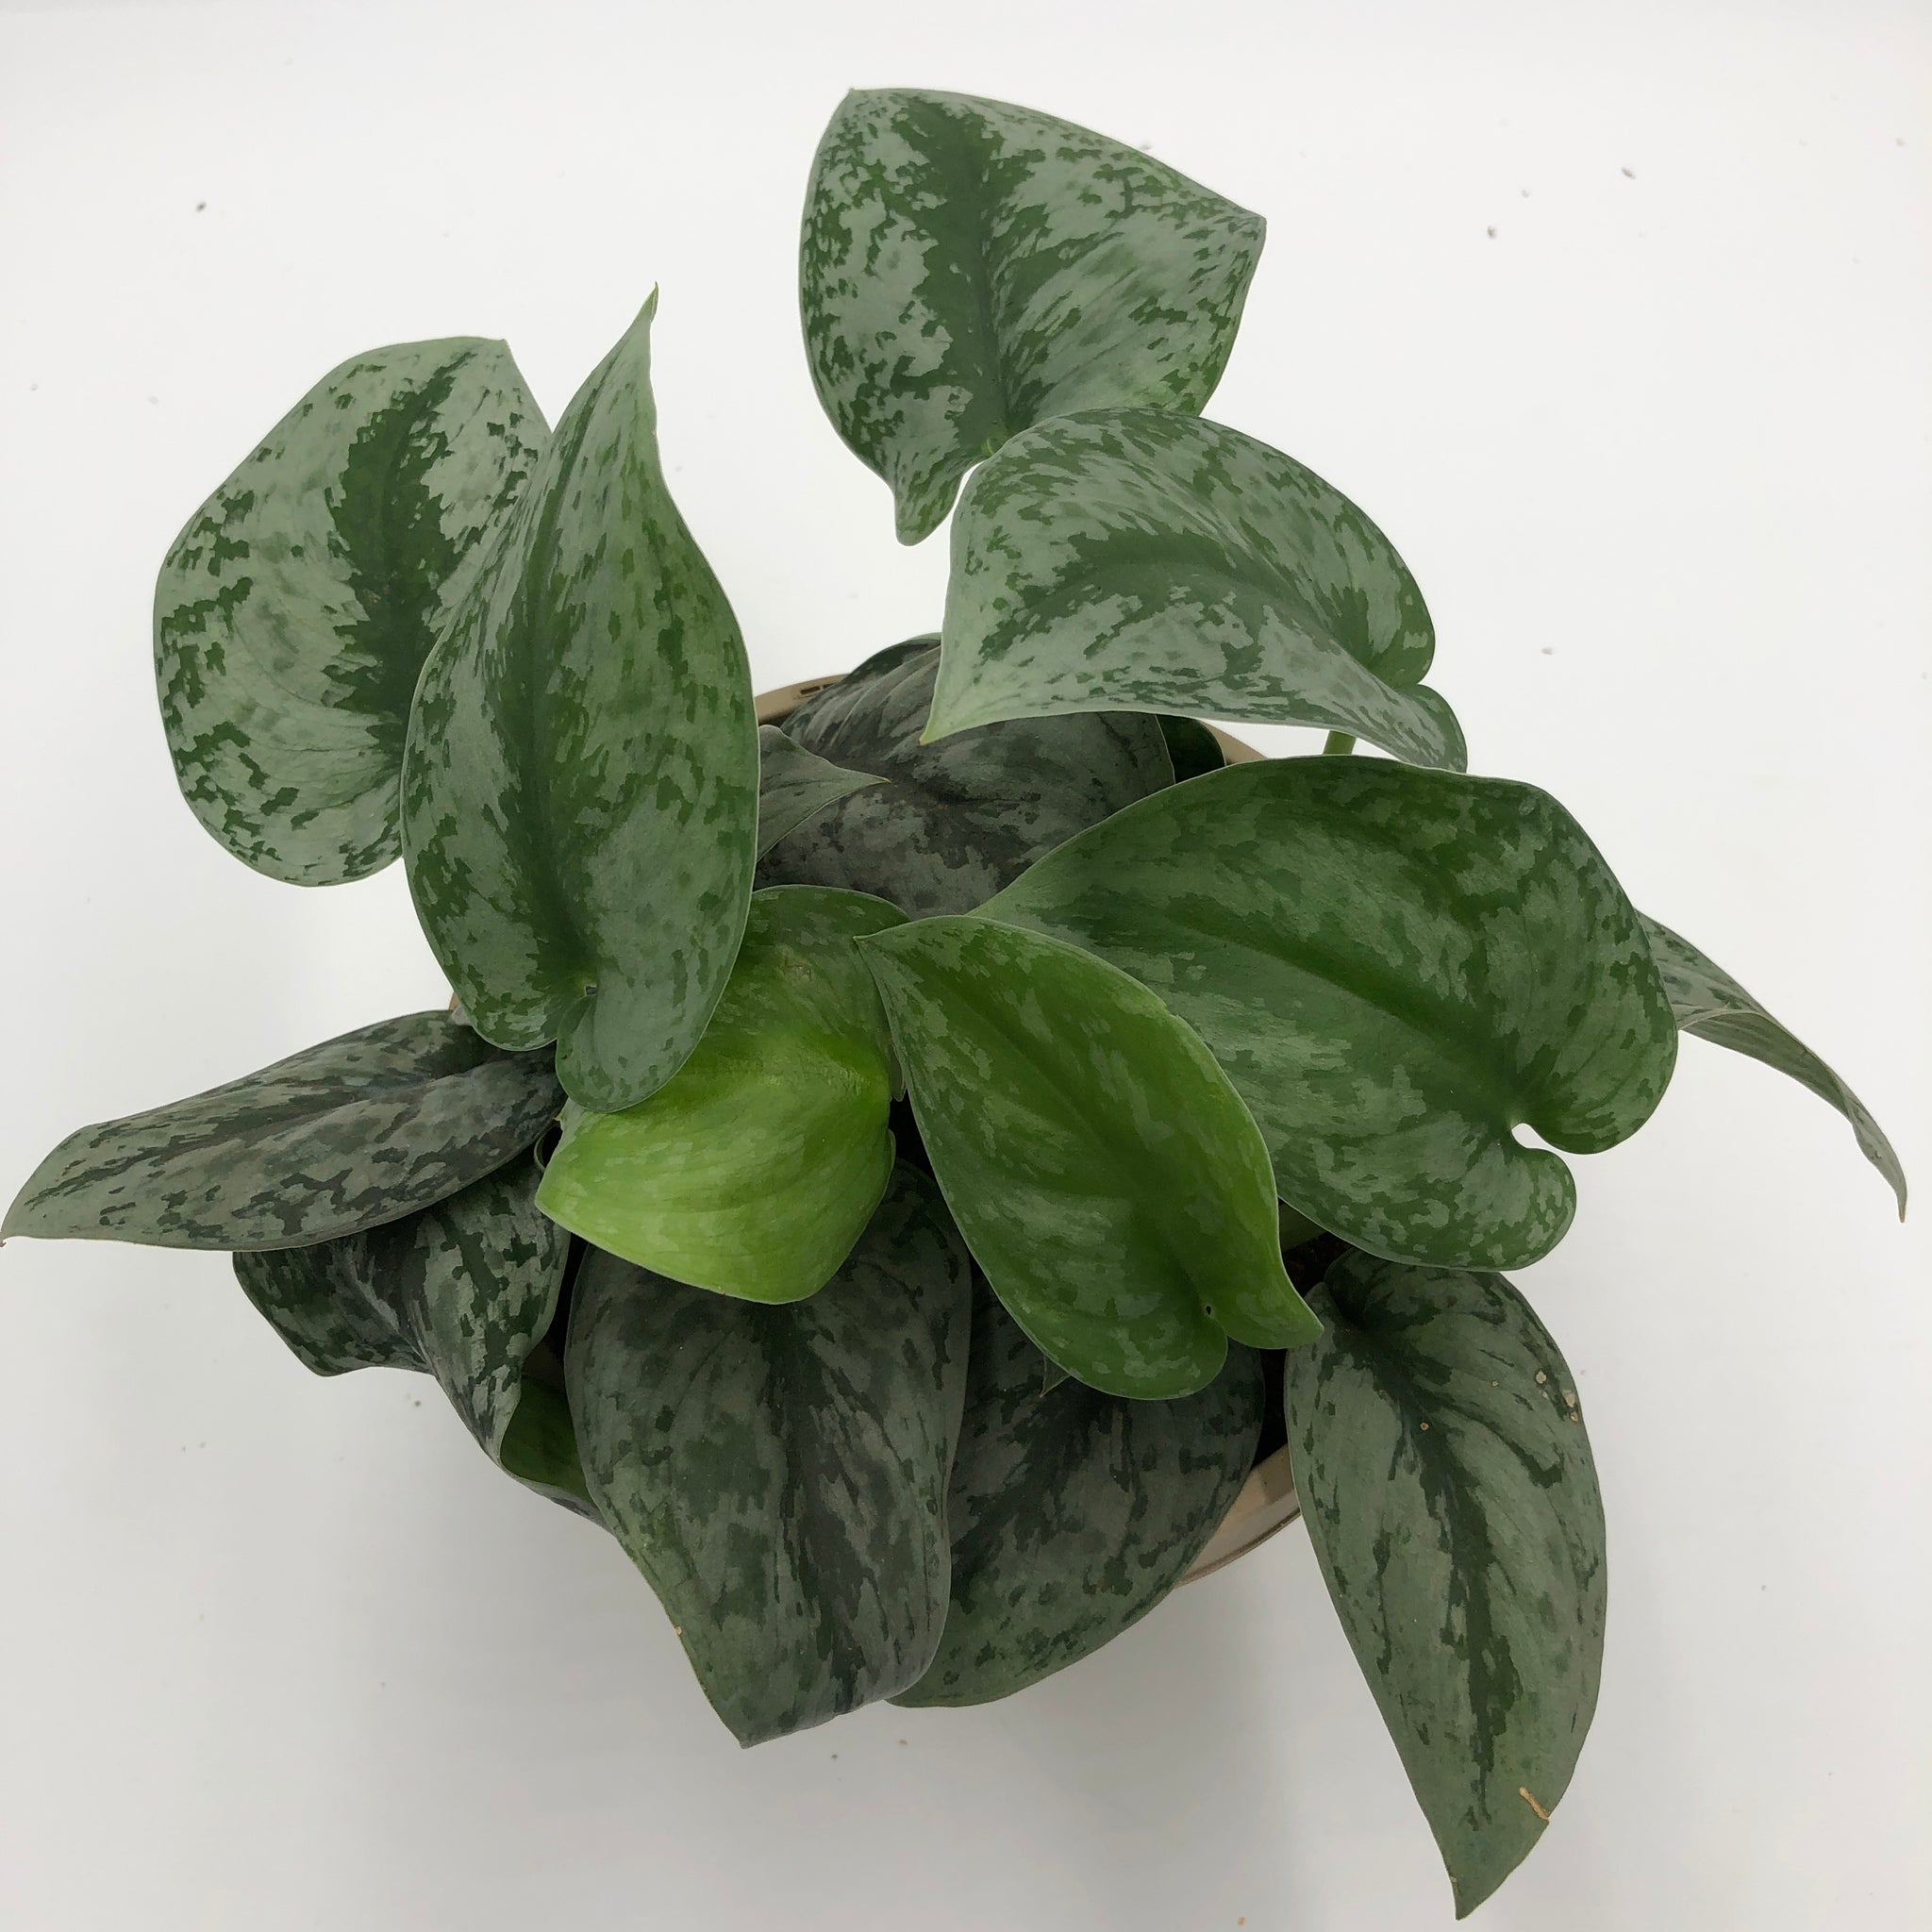 Silver Satin Pothos – We Are Plant Lovers